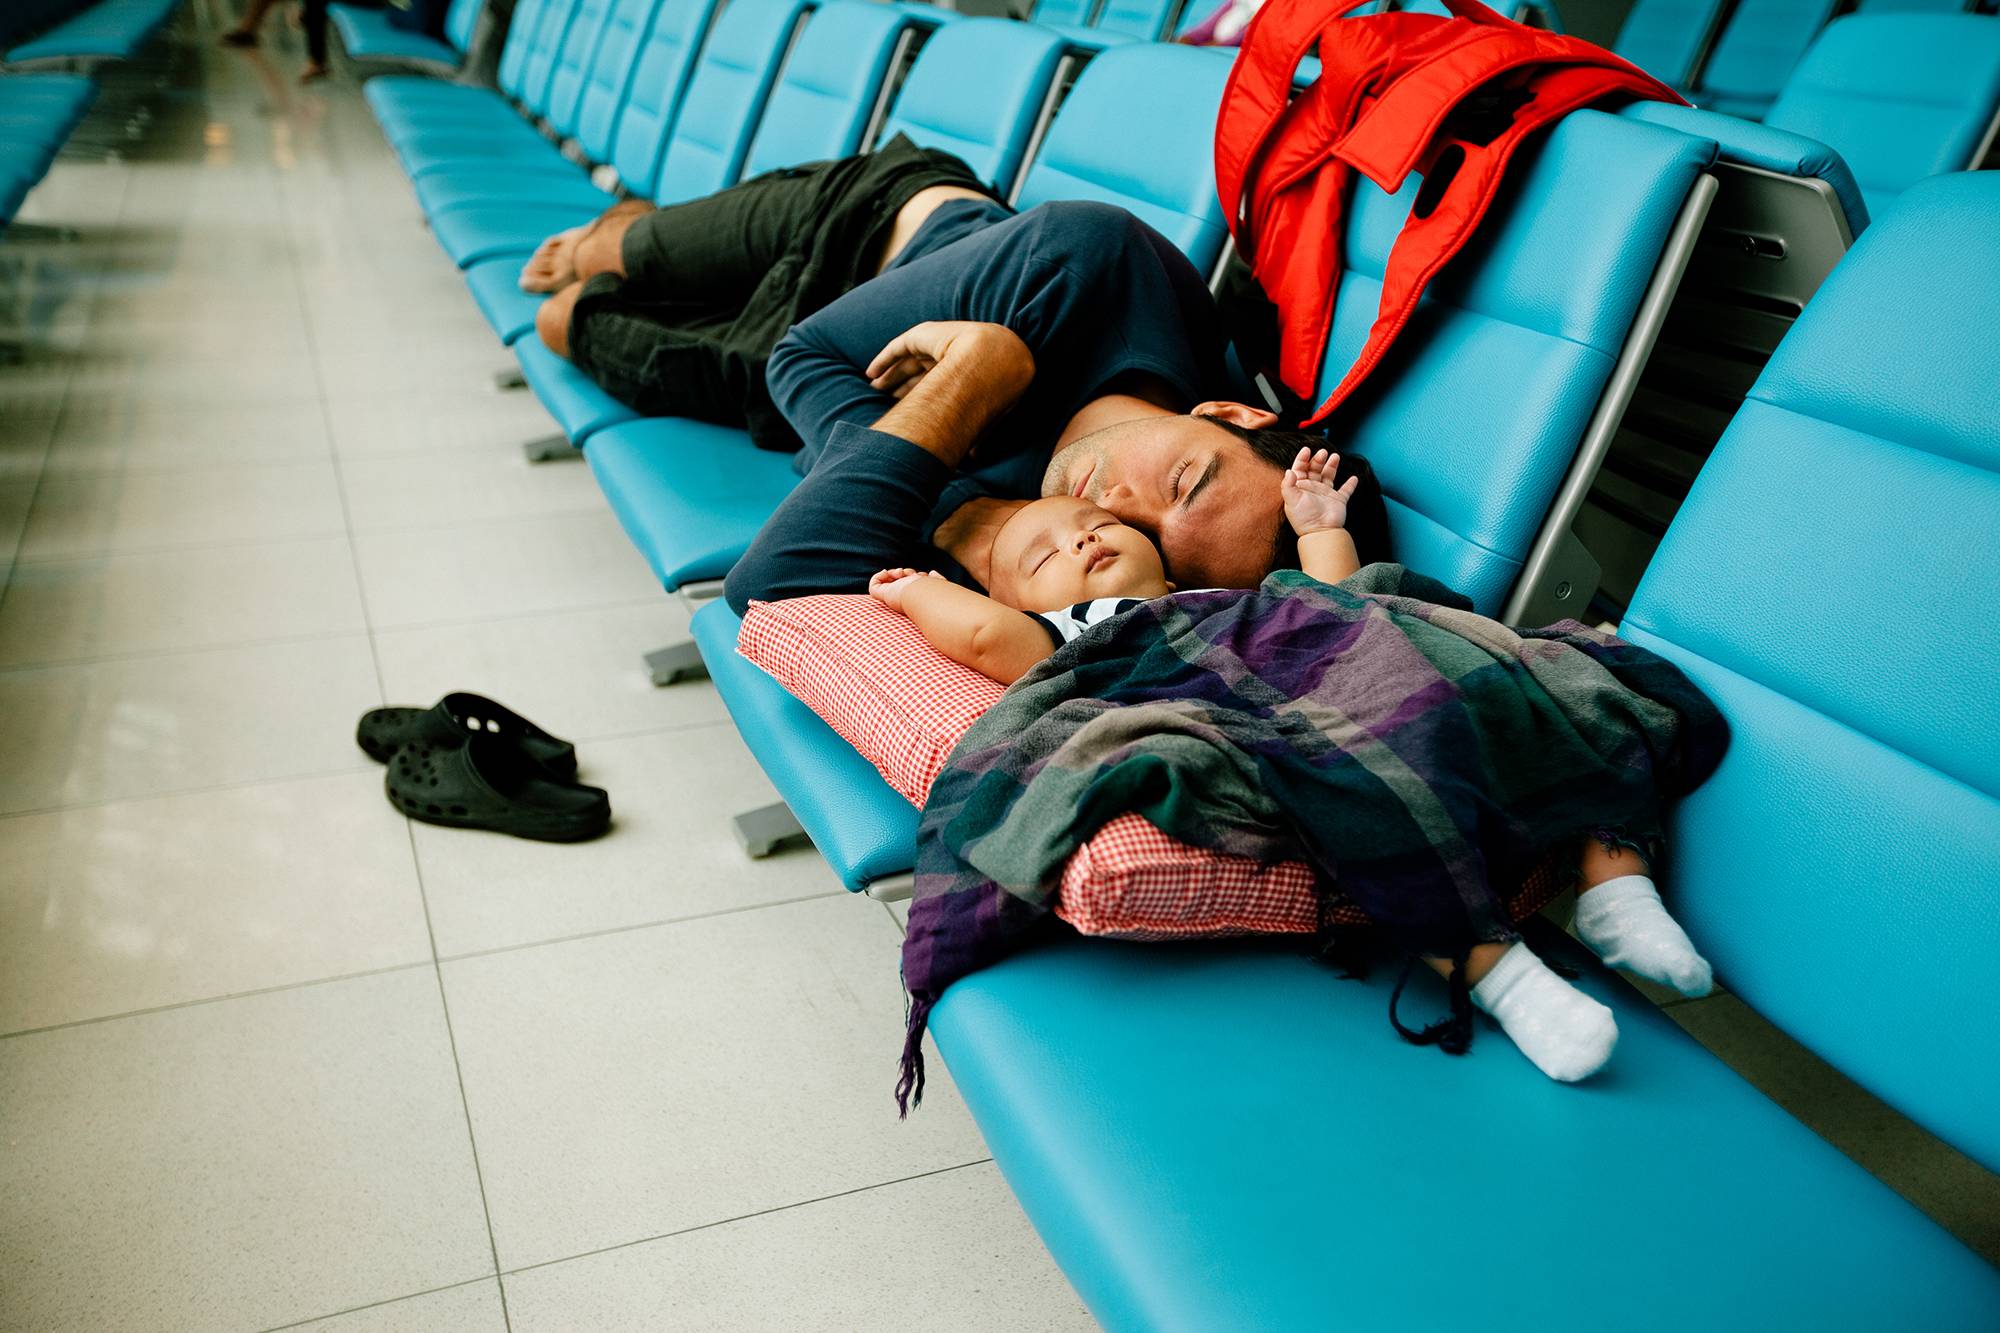 Cute baby and young father sleeping on the seats while waiting for the next flight at the airport.